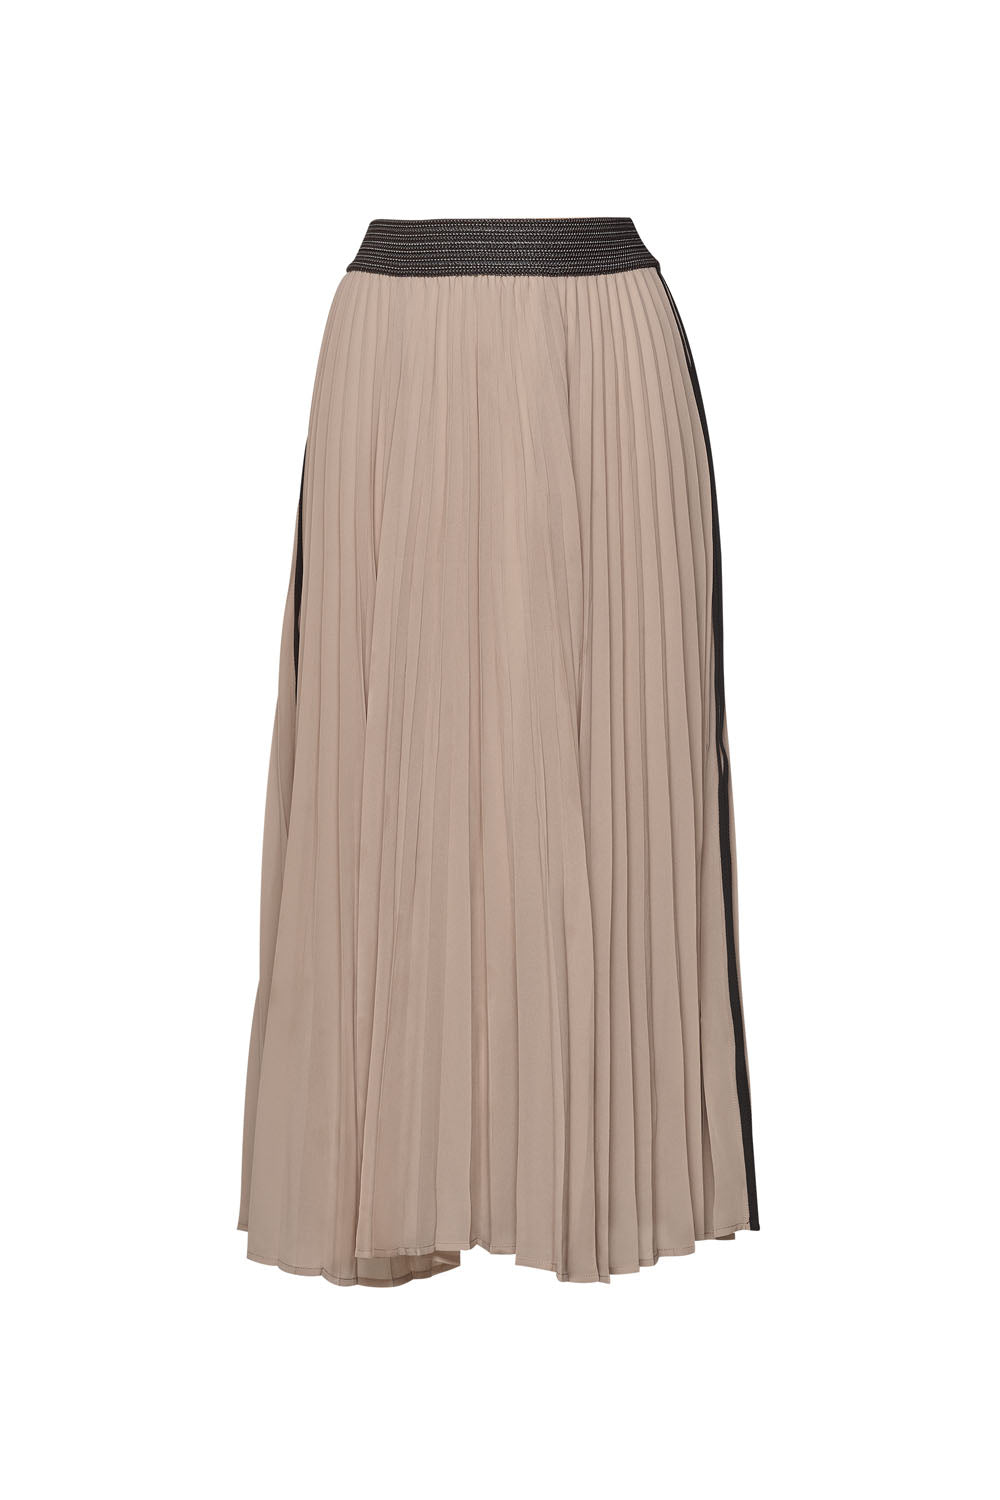 Madly Sweetly Just Pleat It Skirt - Taupe